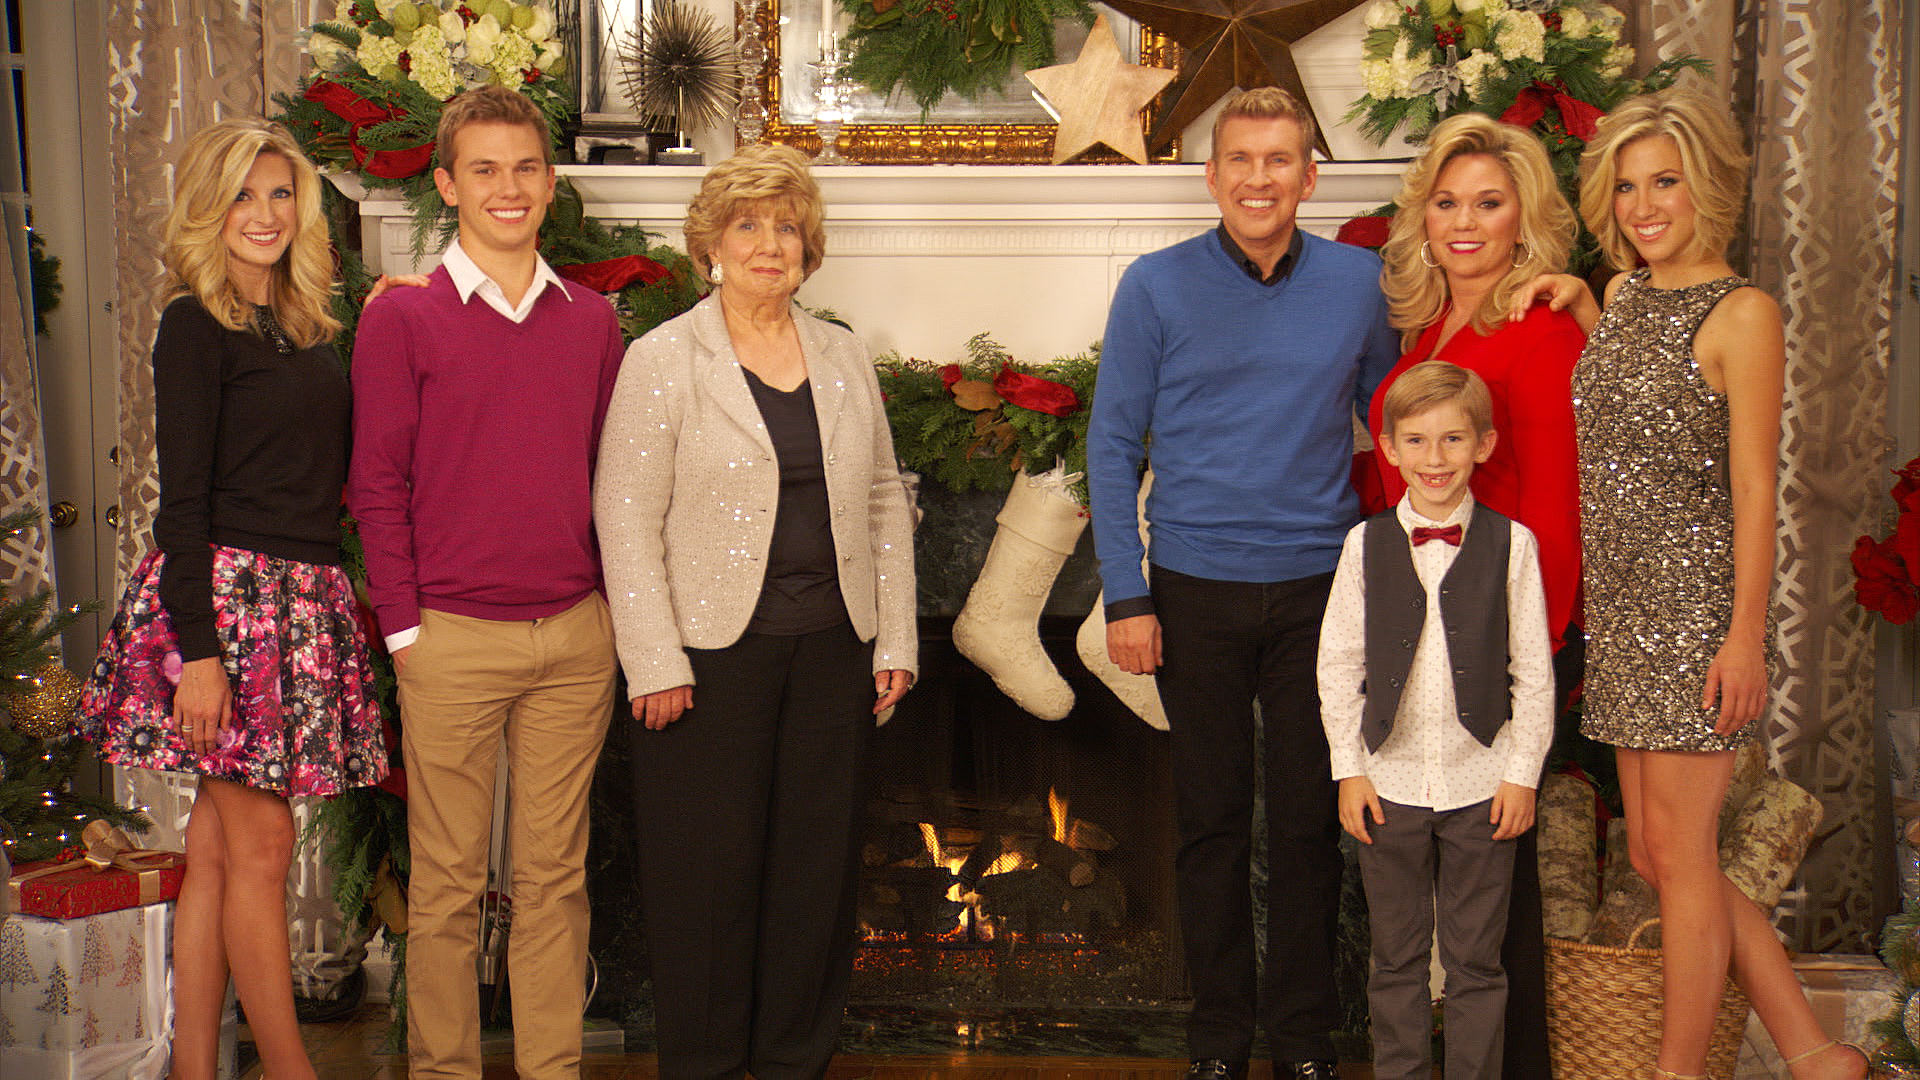 CHRISLEY KNOWS BEST